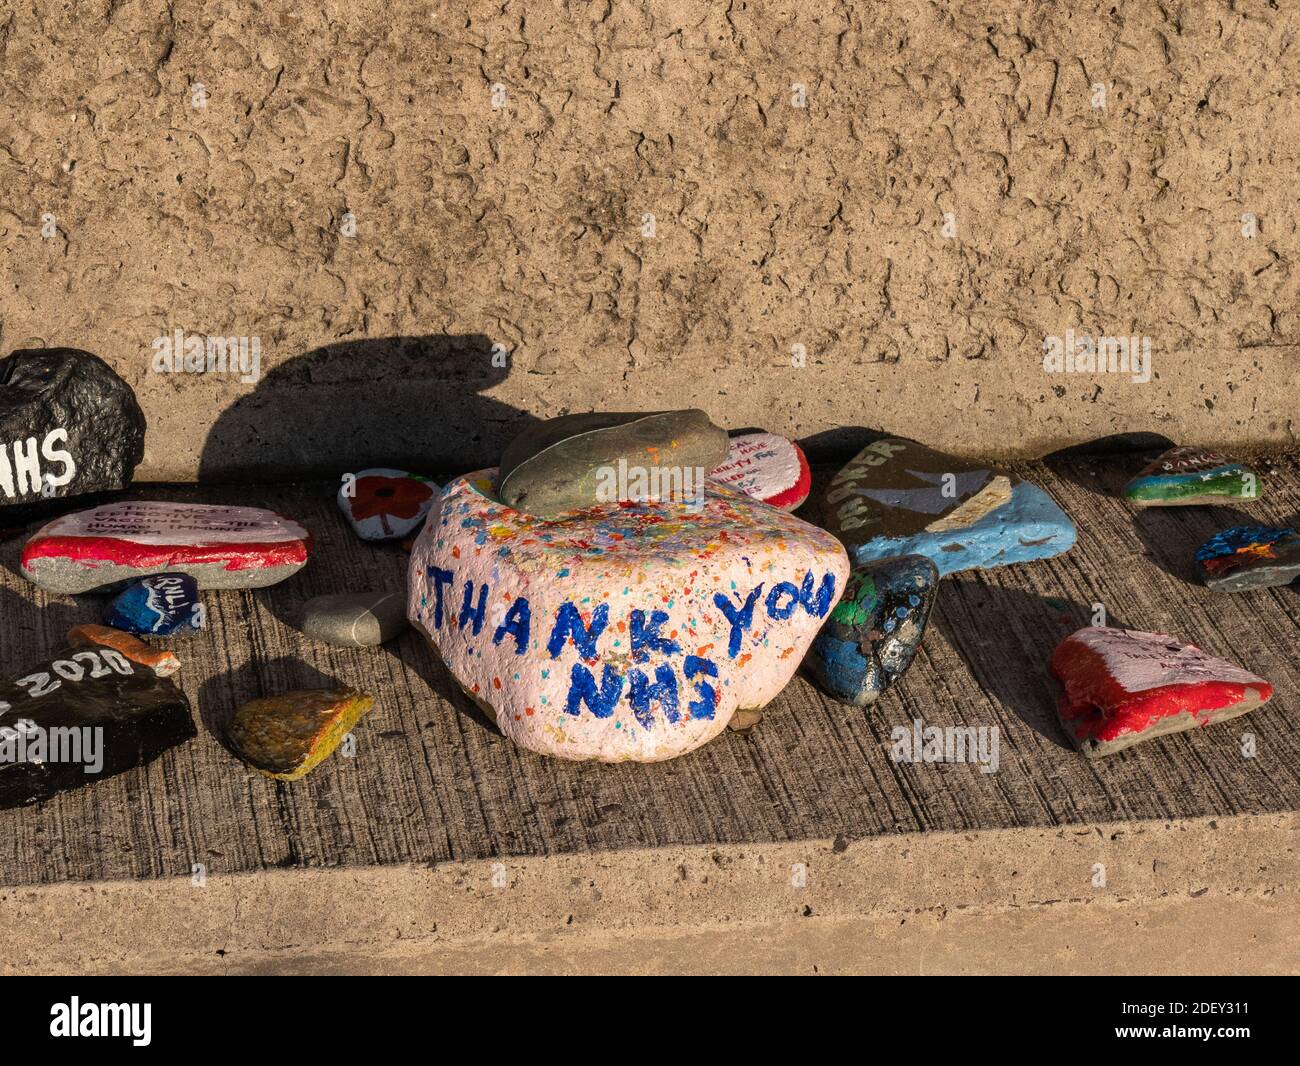 Bangor, Northern Ireland, UK, 2 December 2020: Stones and pebbles on Eisenhower Pier painted with messages of support for NHS staff and keyworkers during the Coronavirus pandemic Stock Photo